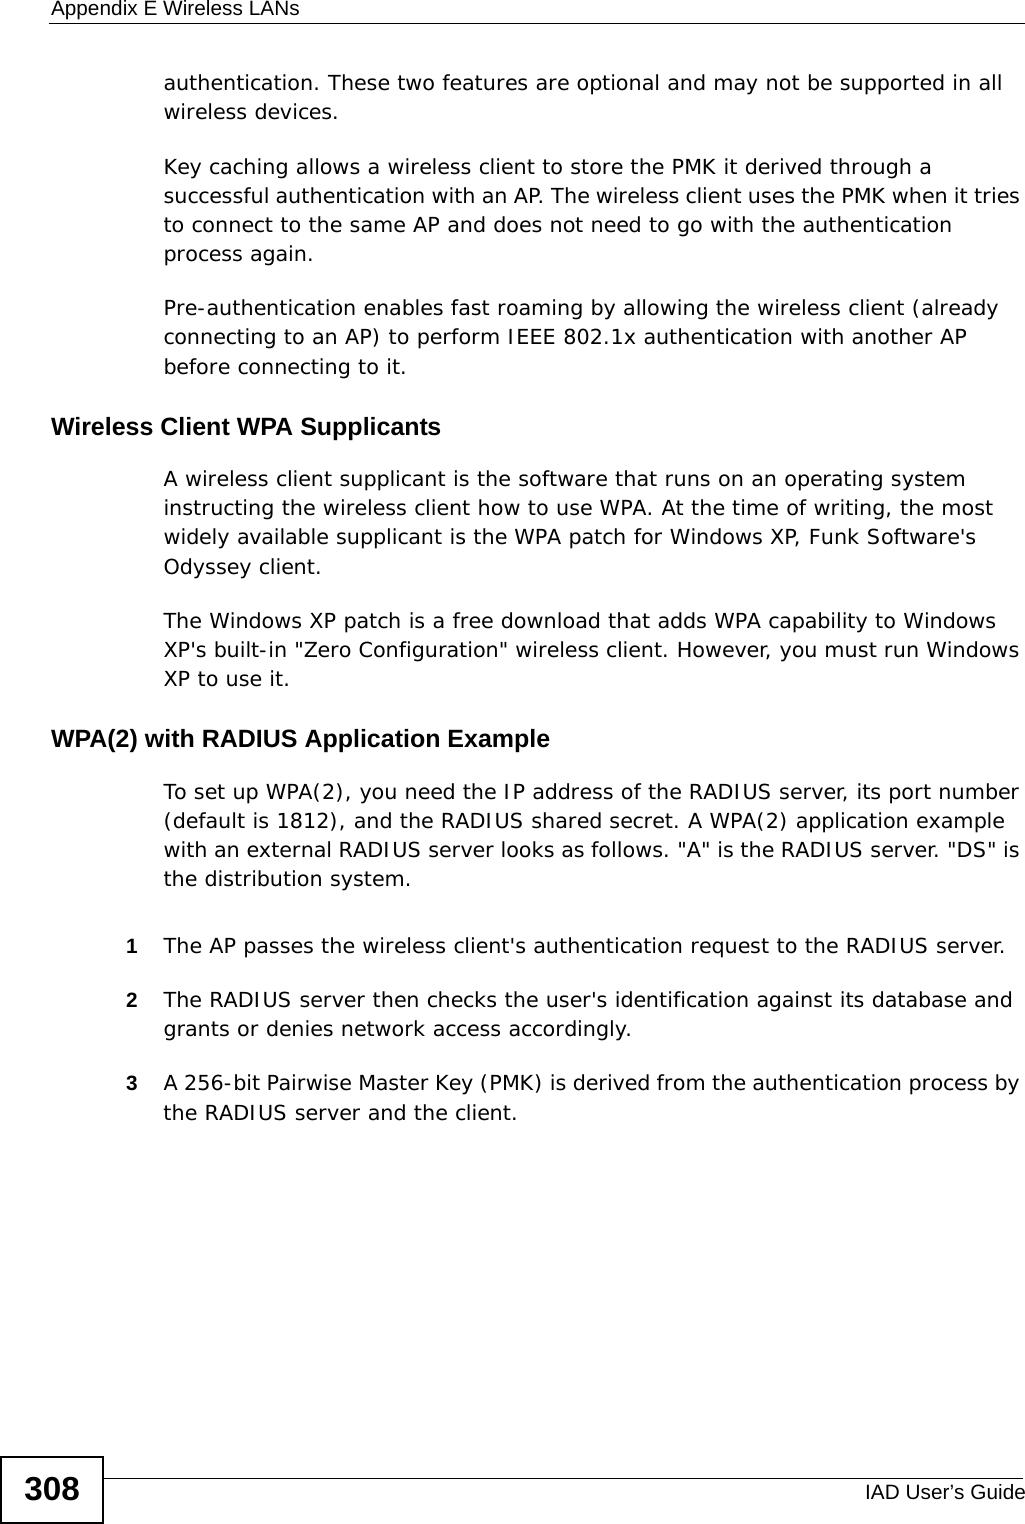 Appendix E Wireless LANsIAD User’s Guide308authentication. These two features are optional and may not be supported in all wireless devices.Key caching allows a wireless client to store the PMK it derived through a successful authentication with an AP. The wireless client uses the PMK when it tries to connect to the same AP and does not need to go with the authentication process again.Pre-authentication enables fast roaming by allowing the wireless client (already connecting to an AP) to perform IEEE 802.1x authentication with another AP before connecting to it.Wireless Client WPA SupplicantsA wireless client supplicant is the software that runs on an operating system instructing the wireless client how to use WPA. At the time of writing, the most widely available supplicant is the WPA patch for Windows XP, Funk Software&apos;s Odyssey client. The Windows XP patch is a free download that adds WPA capability to Windows XP&apos;s built-in &quot;Zero Configuration&quot; wireless client. However, you must run Windows XP to use it. WPA(2) with RADIUS Application ExampleTo set up WPA(2), you need the IP address of the RADIUS server, its port number (default is 1812), and the RADIUS shared secret. A WPA(2) application example with an external RADIUS server looks as follows. &quot;A&quot; is the RADIUS server. &quot;DS&quot; is the distribution system.1The AP passes the wireless client&apos;s authentication request to the RADIUS server.2The RADIUS server then checks the user&apos;s identification against its database and grants or denies network access accordingly.3A 256-bit Pairwise Master Key (PMK) is derived from the authentication process by the RADIUS server and the client.